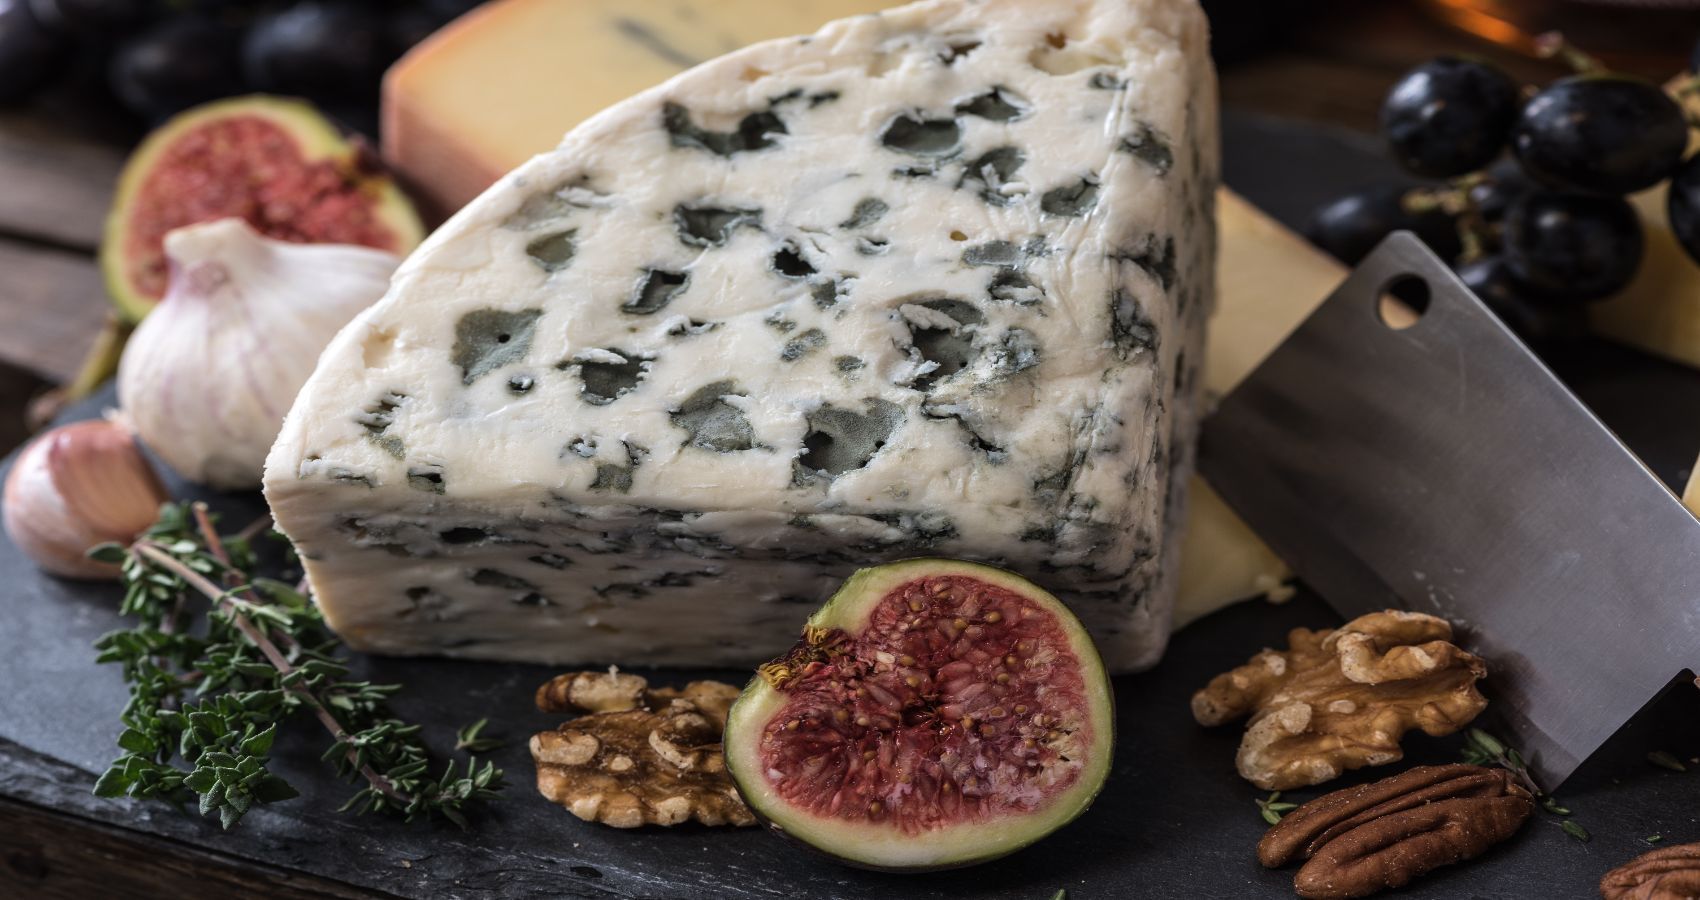 A large block of blue cheese on a board